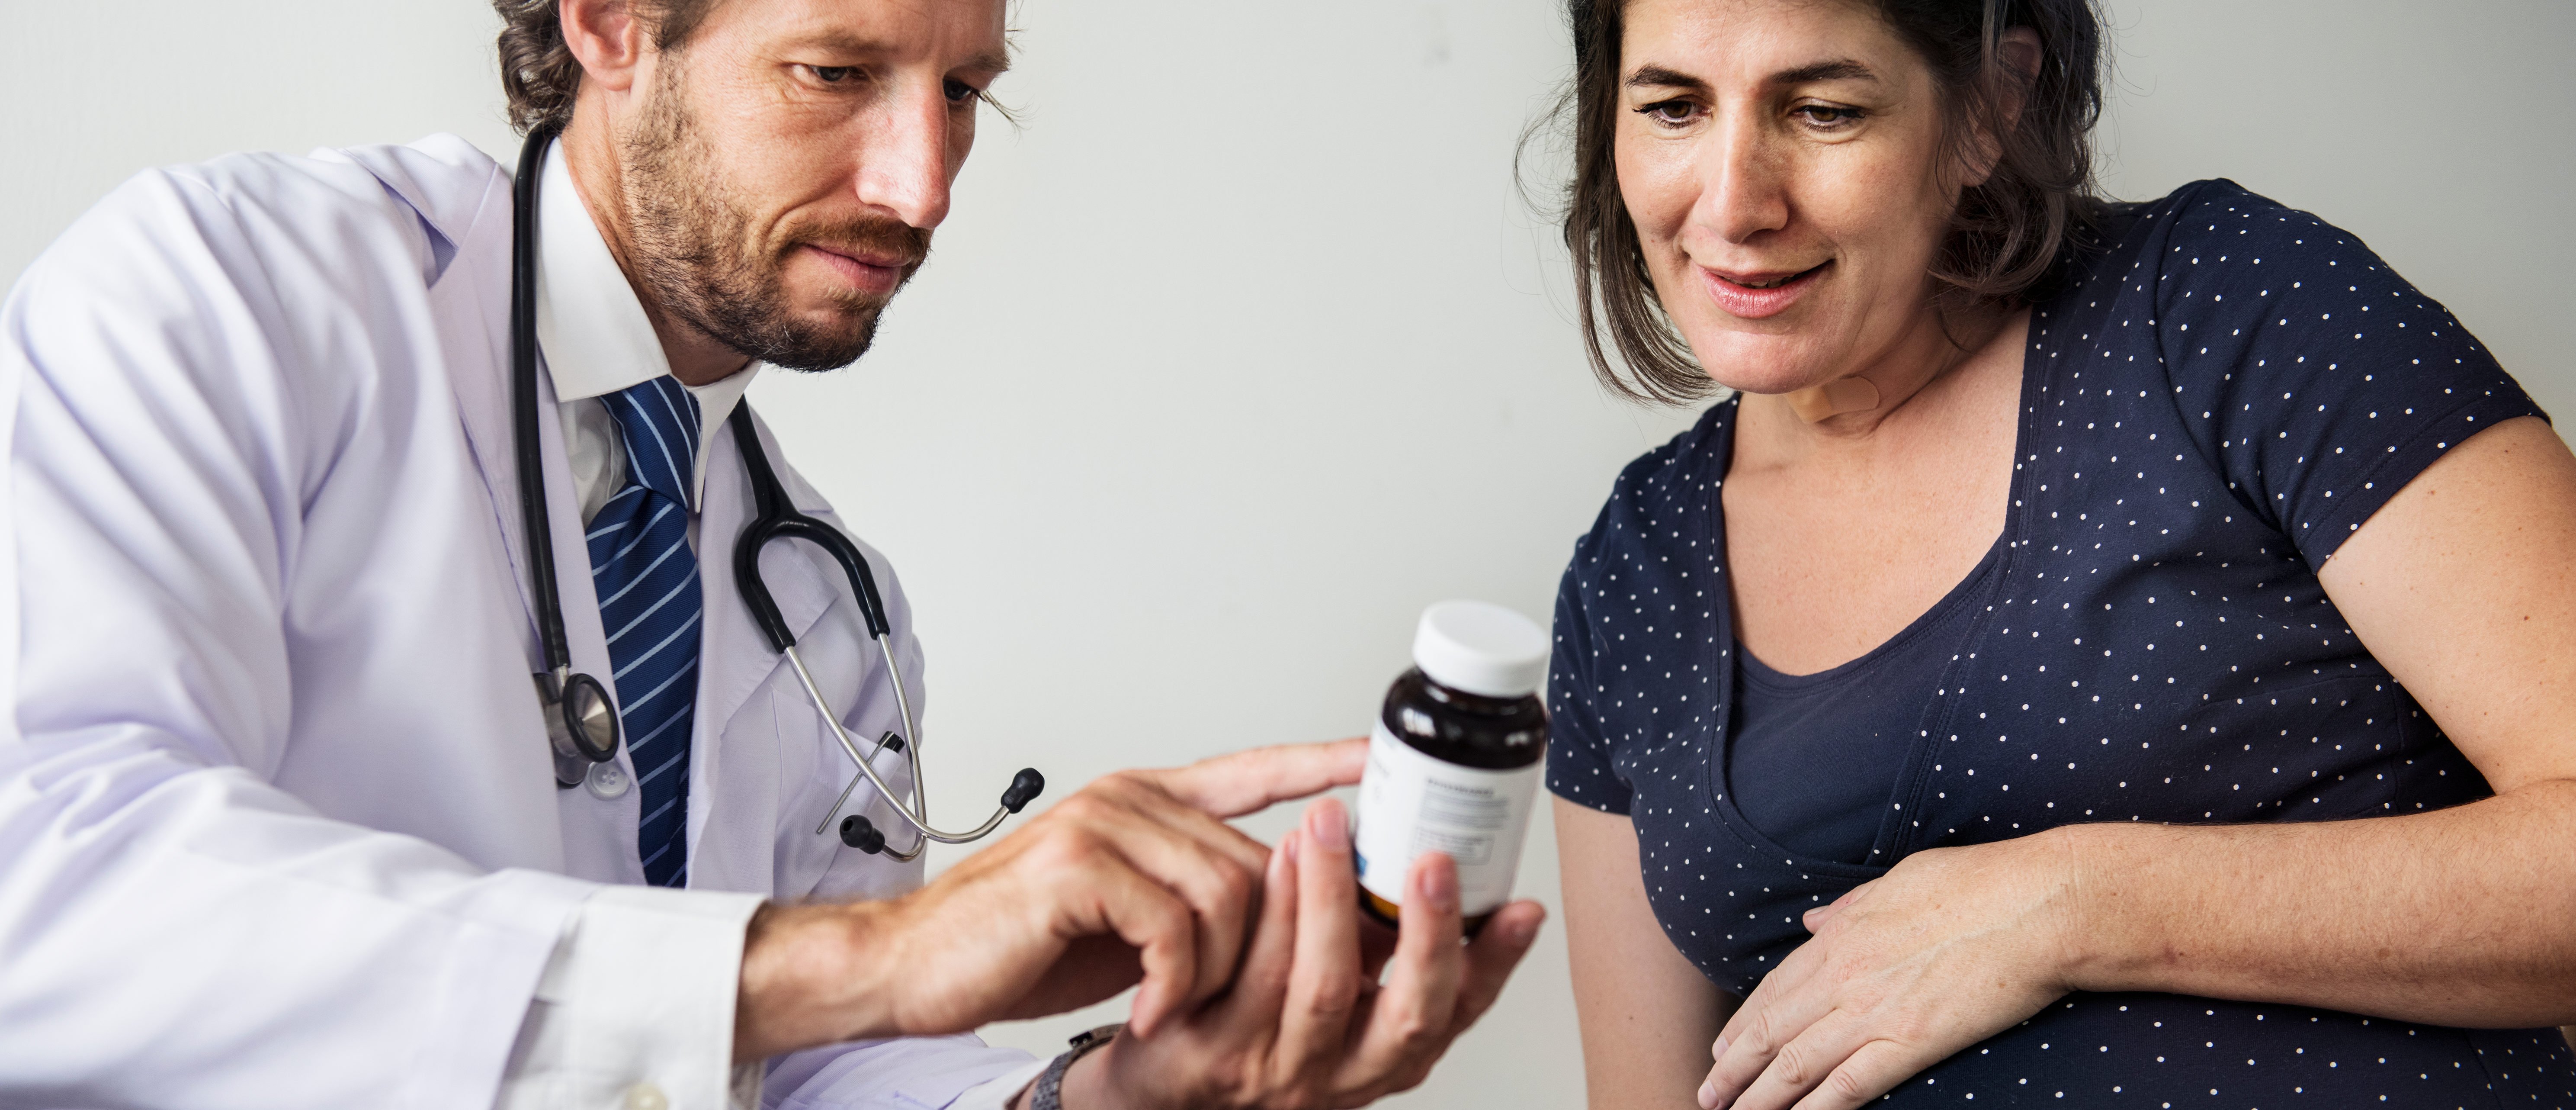 Doctor talking to woman about her baby (Shutterstock/RawPixel)